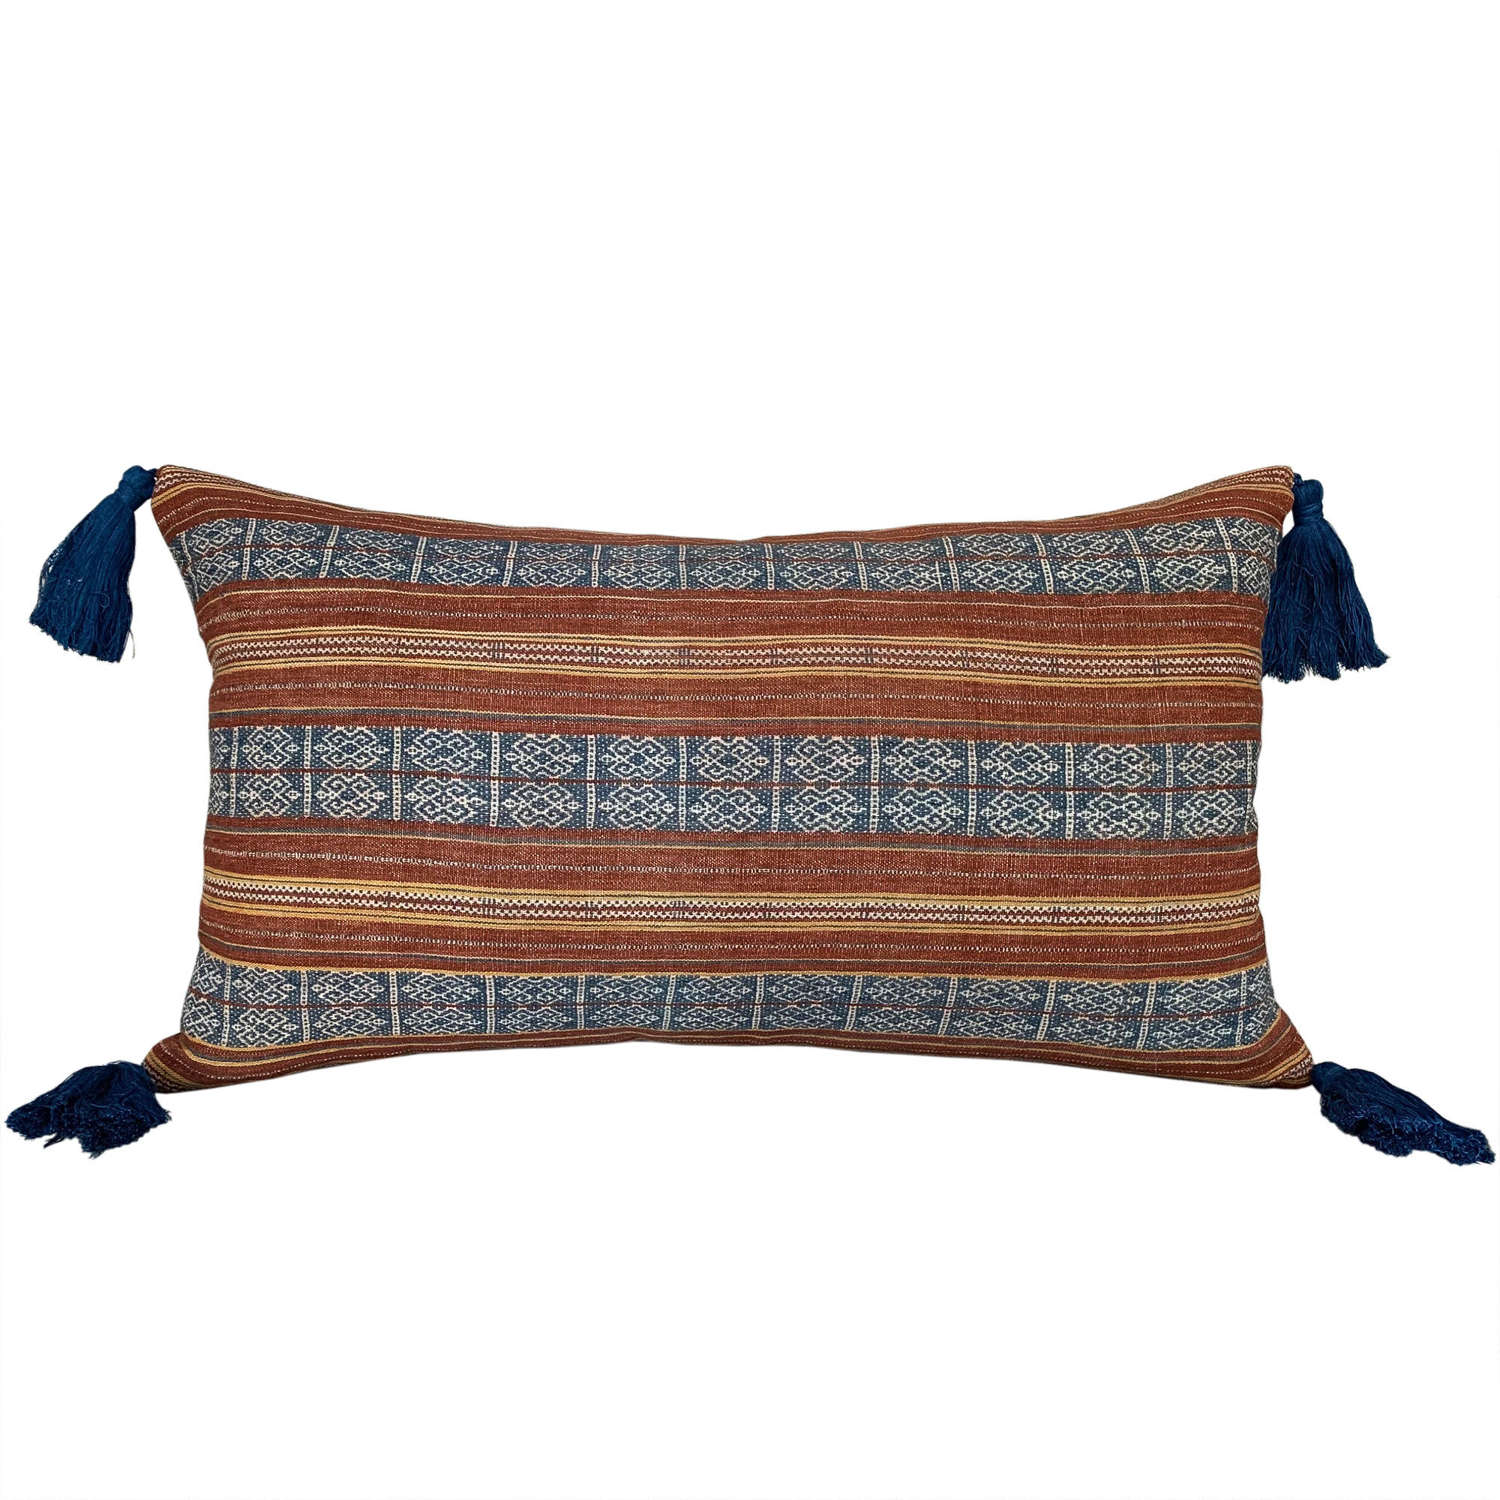 Timor cushion with blue tassels